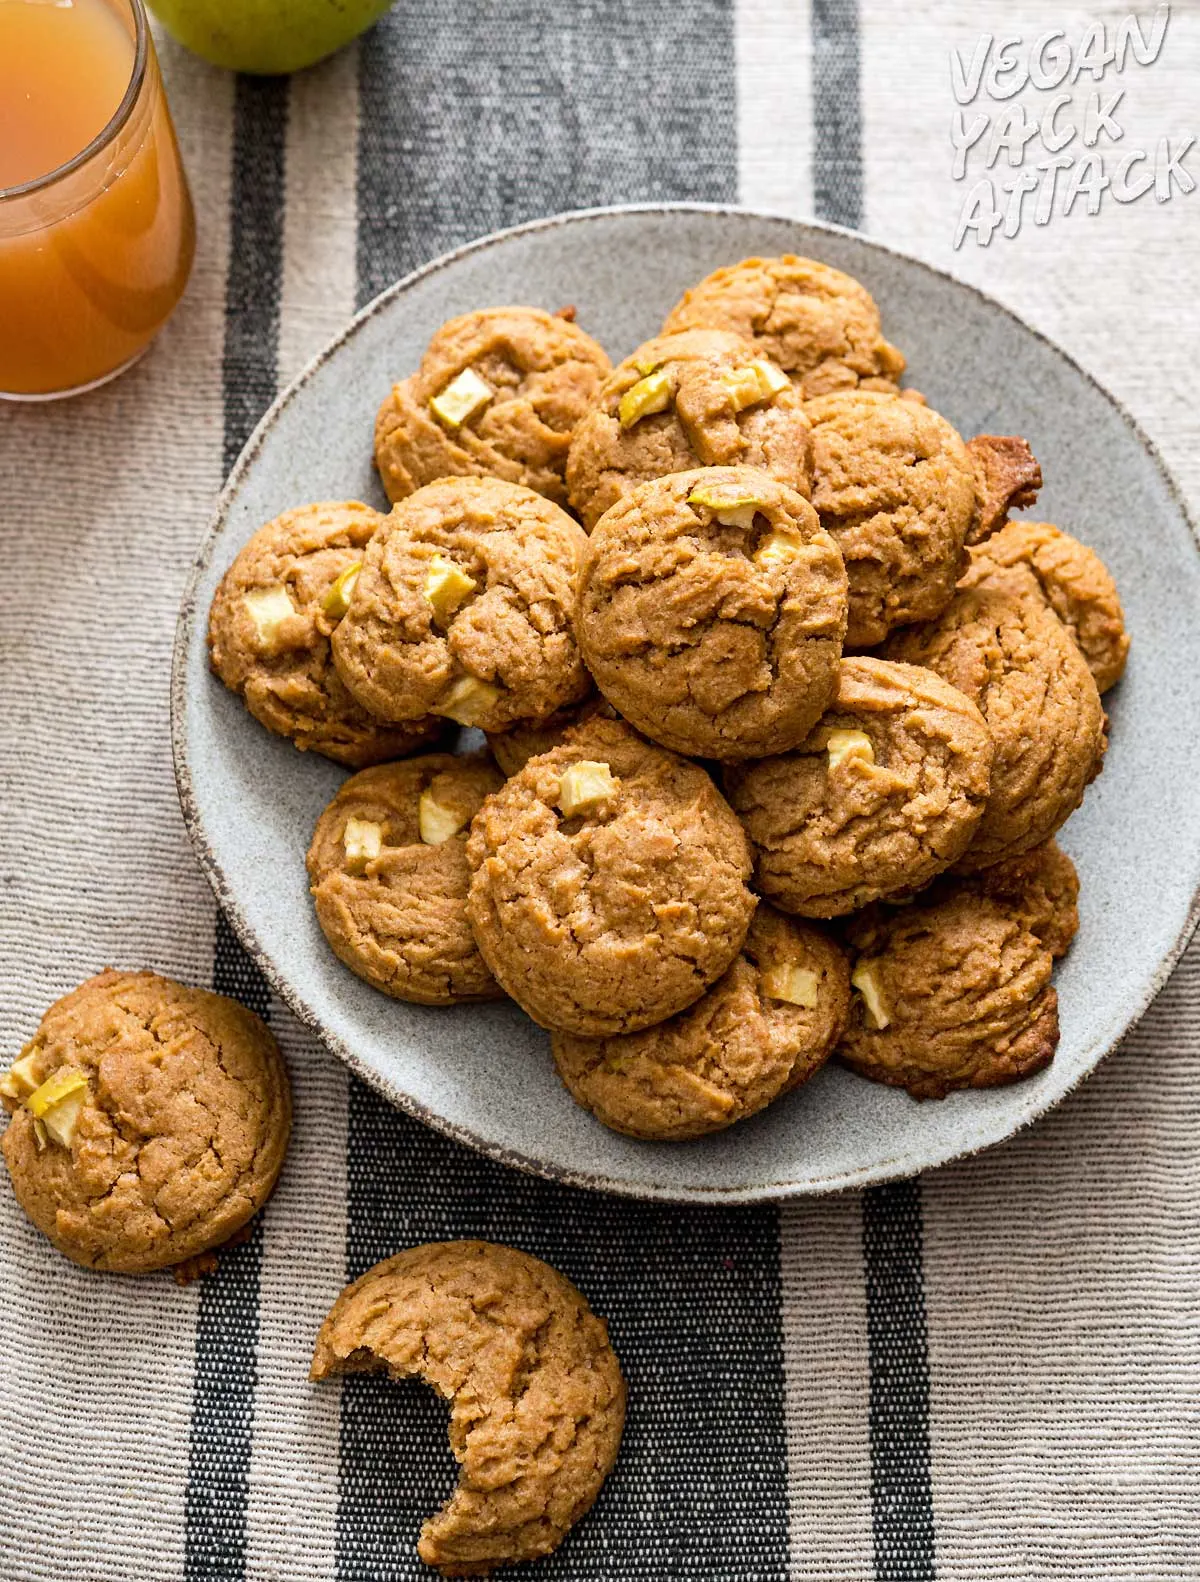 apple cider cookies in a pile on a grey plate next to a mug of cider